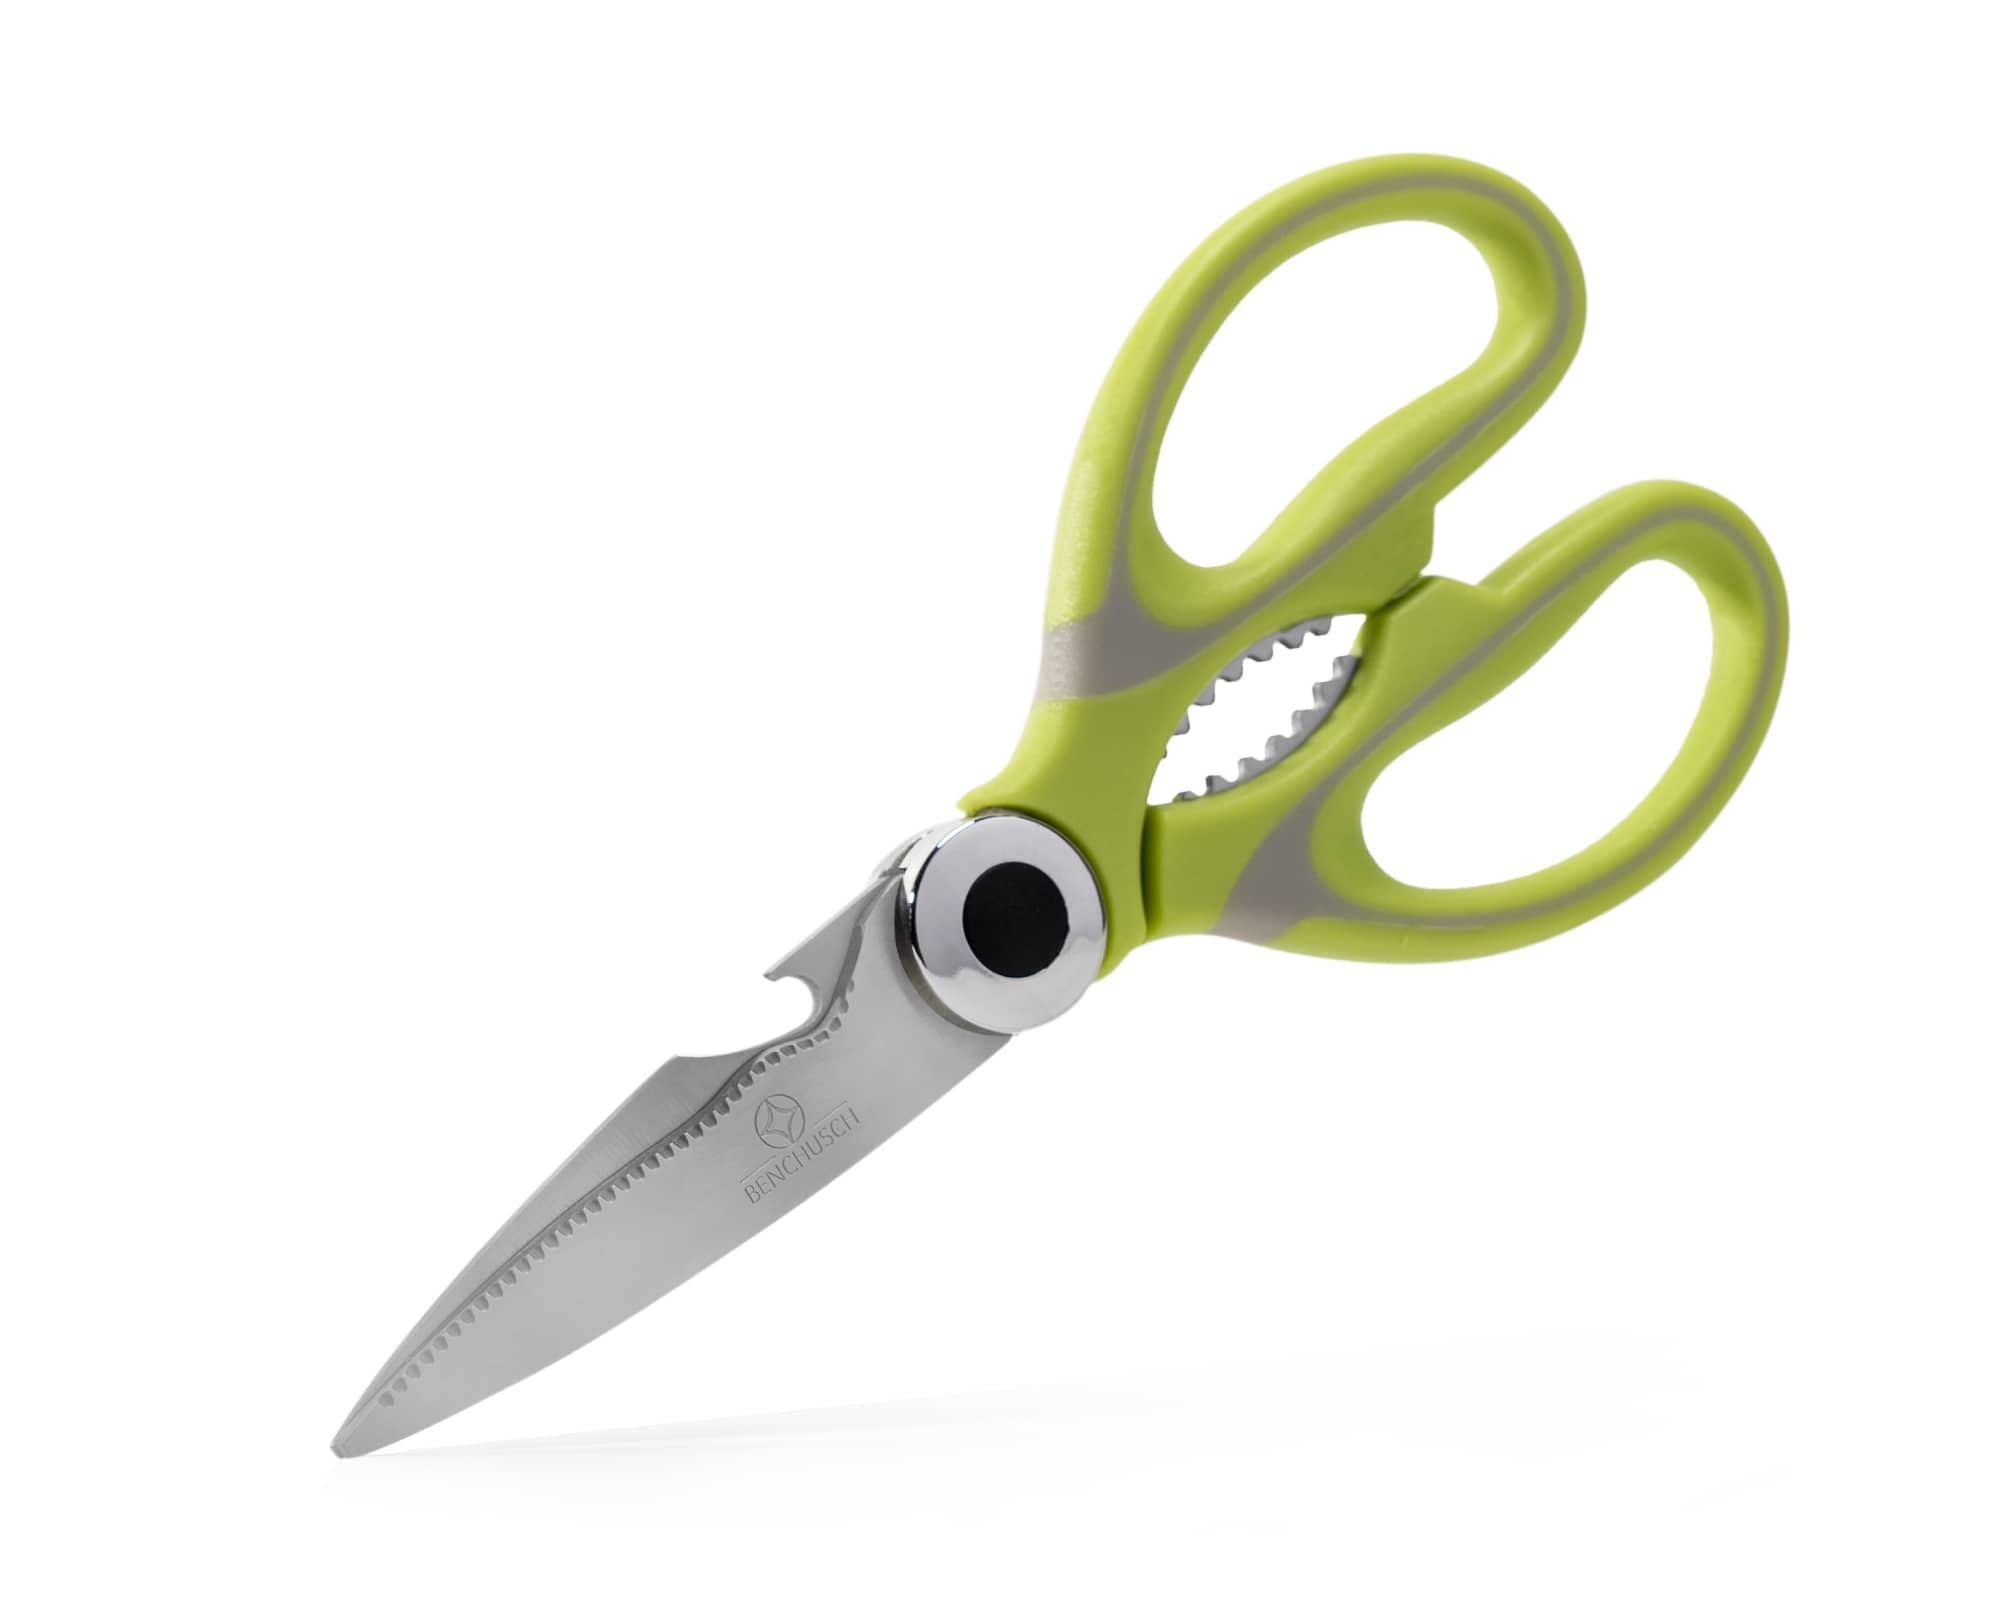 Another view of Benchusch Multipurpose Kitchen Shears, green color with stainless steel blade, PP handles